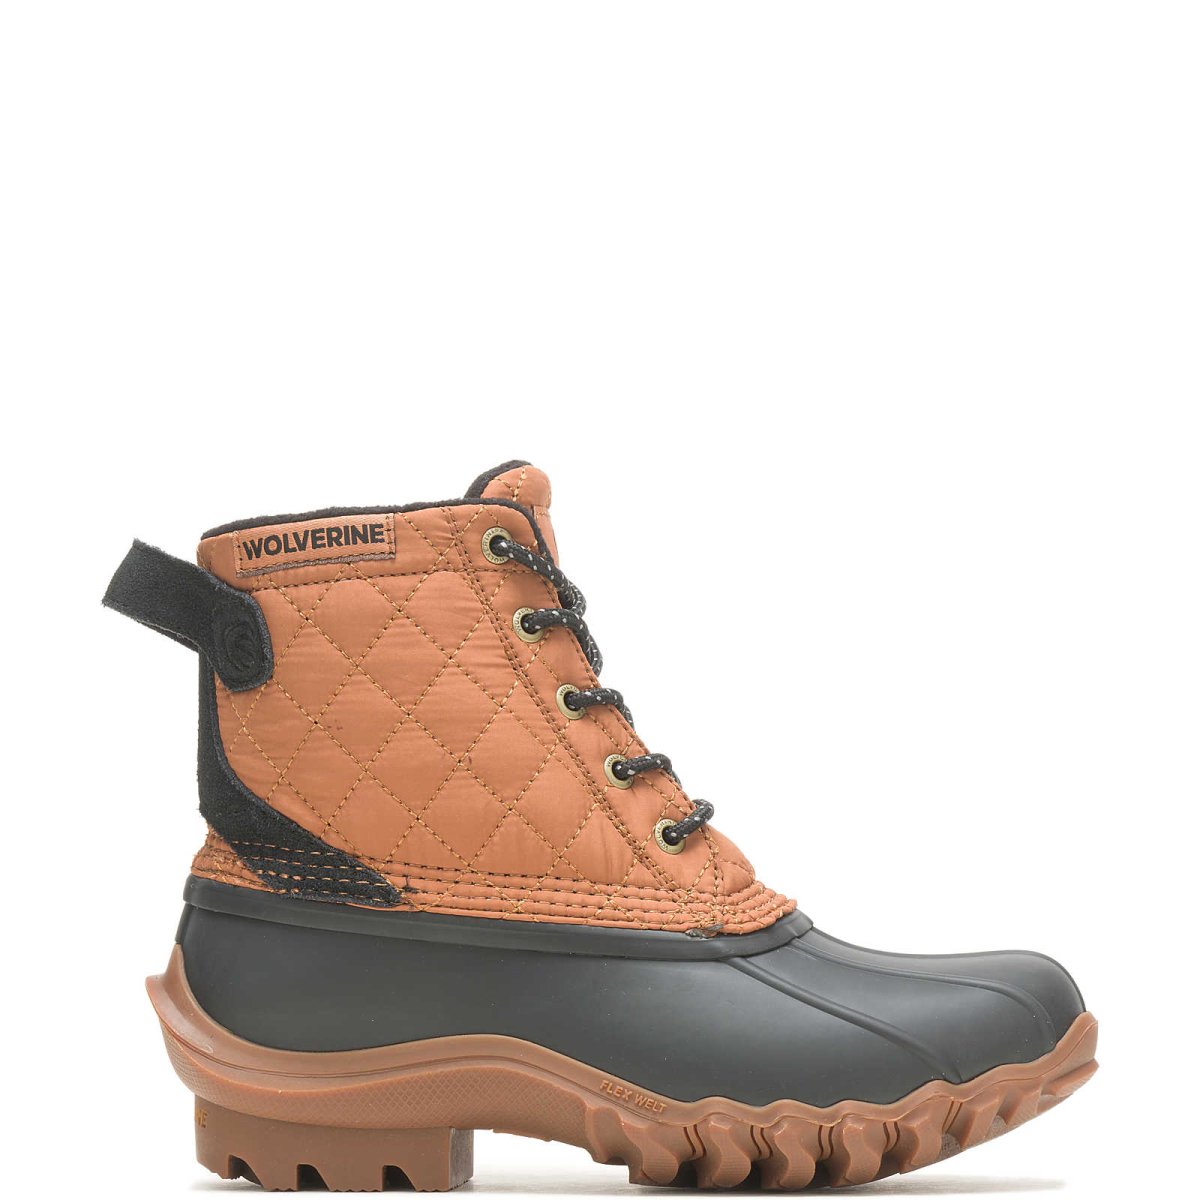 WOLVERINE TORRENT QUILTED WOMEN'S BOOT (W880380) IN BROWN SUGAR - TLW Shoes